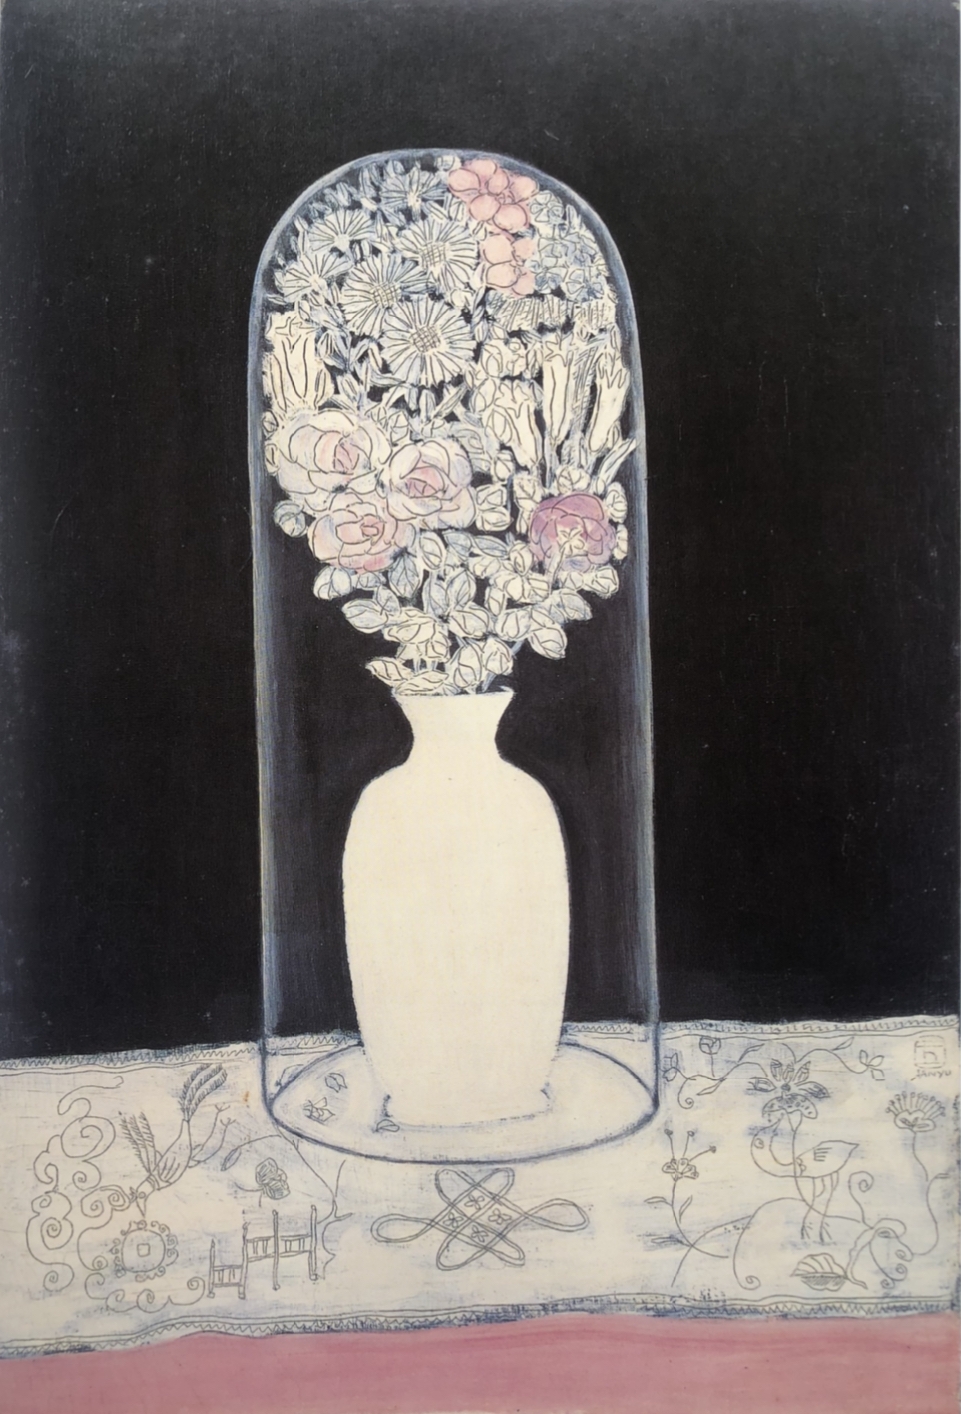 Sanyu

Marriage Bouquet, 1930s

oil on canvas

73 x 50 cm.

The collection of Leo Shih